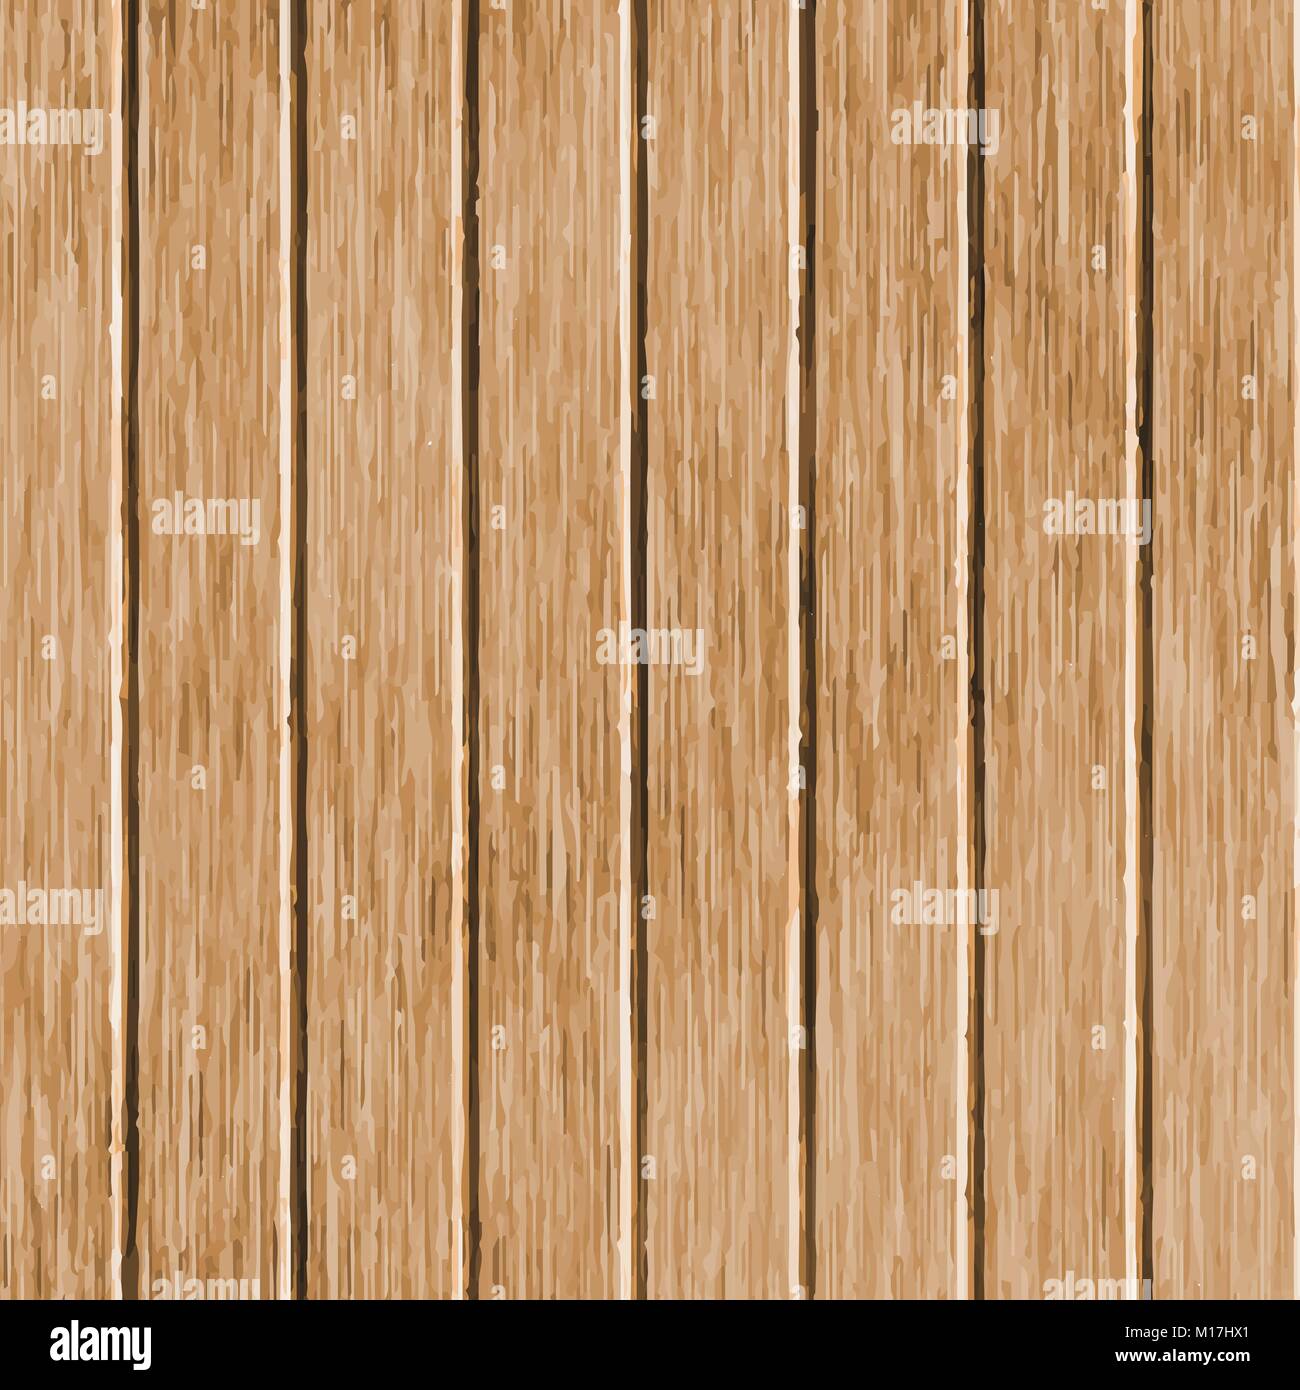 Walnut wood texture. Board wooden surface. Abstract grunge wooden pattern. Vector illustration background Stock Vector